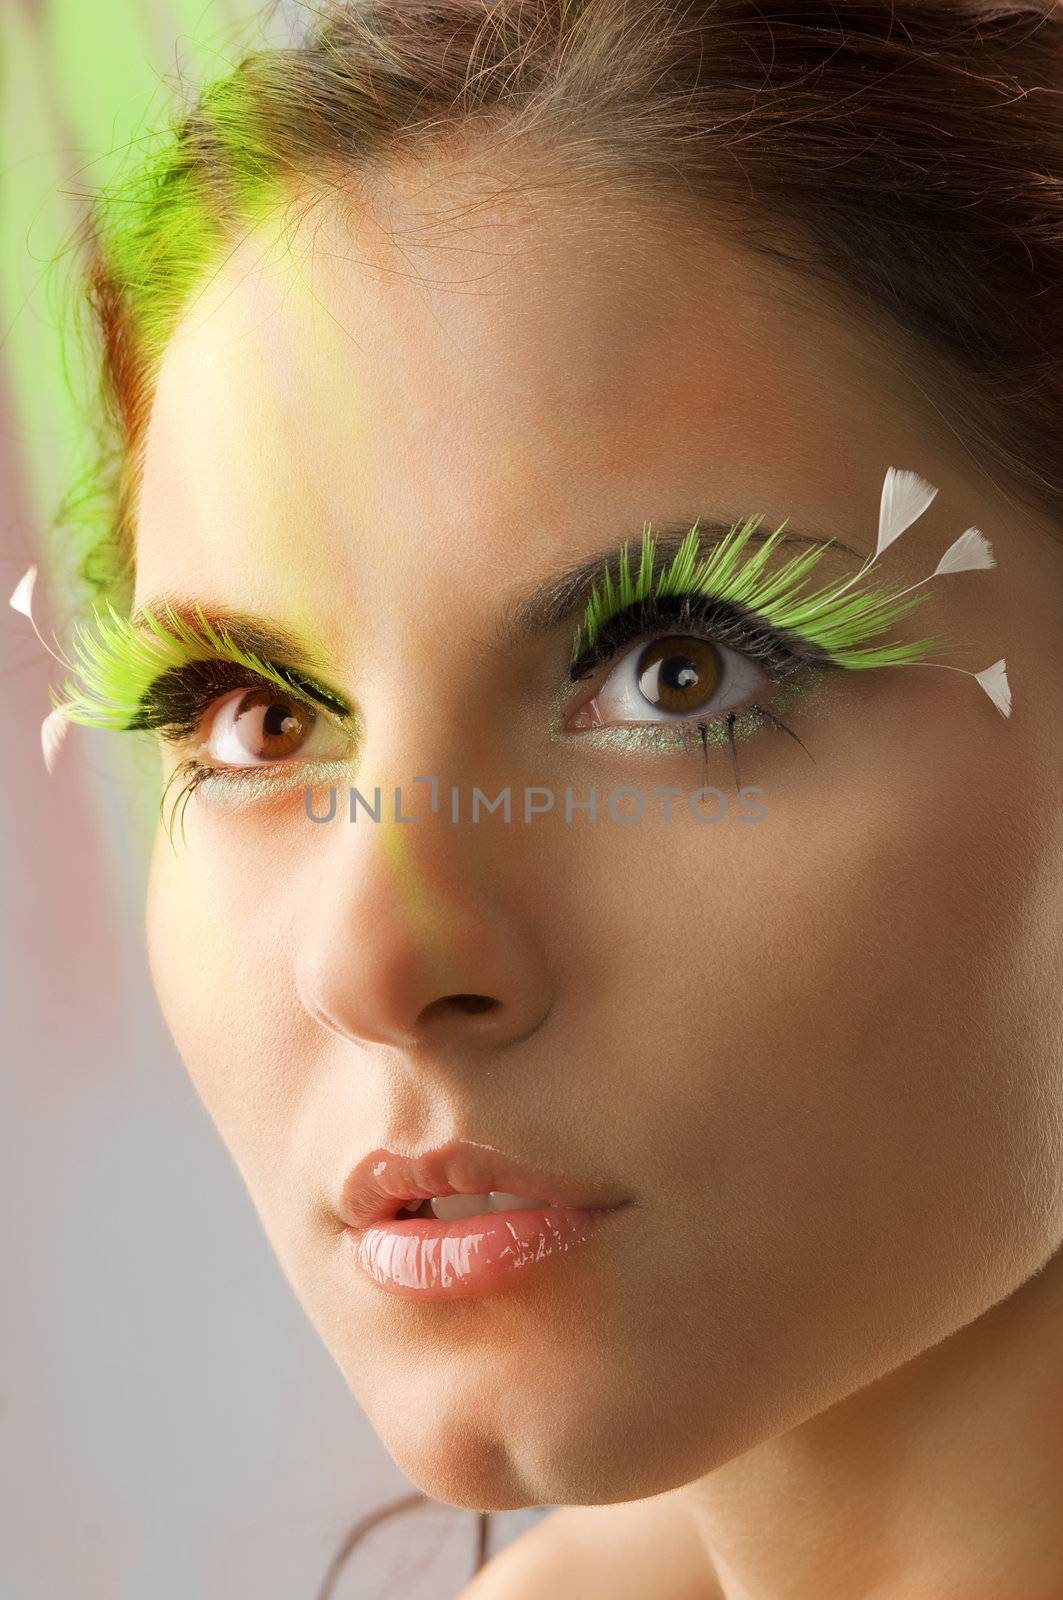 nice portrait of a young woman with artificial green eyelashes on her eyes